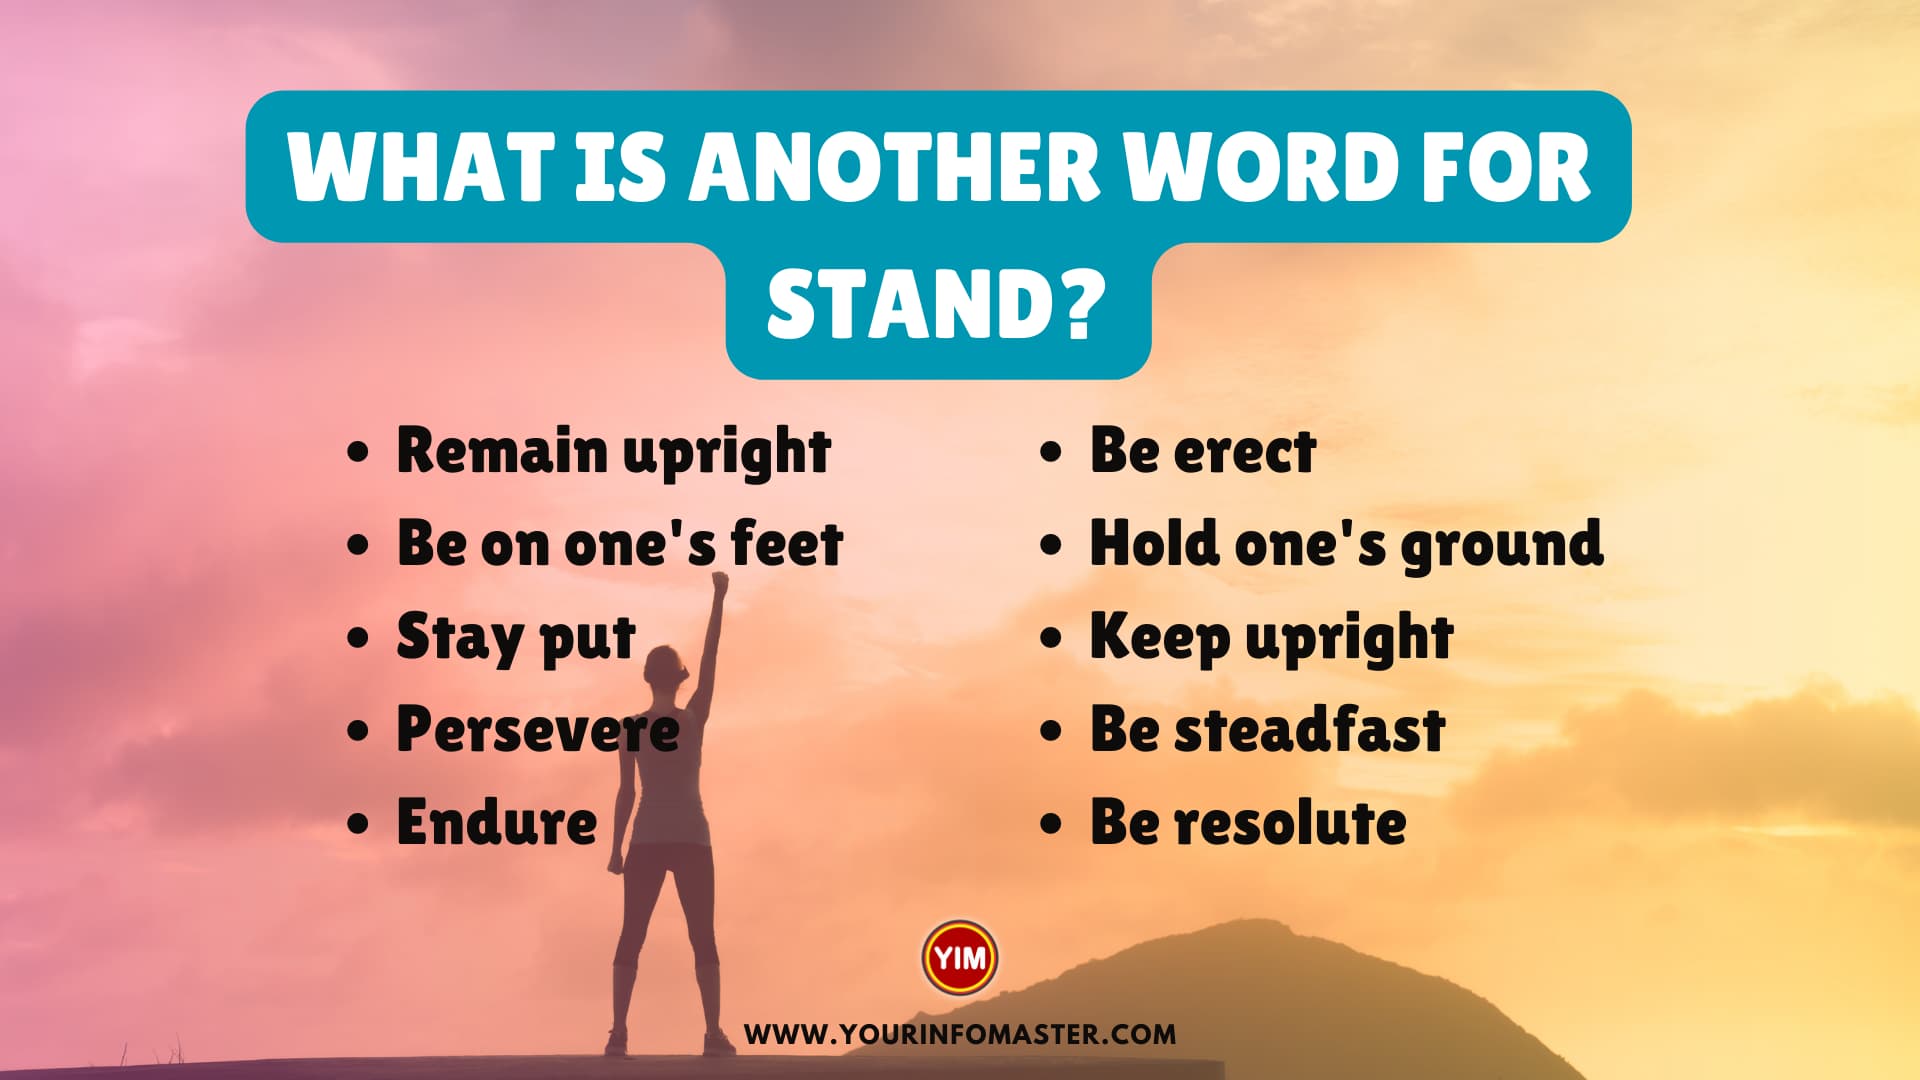 What is another word for Stand